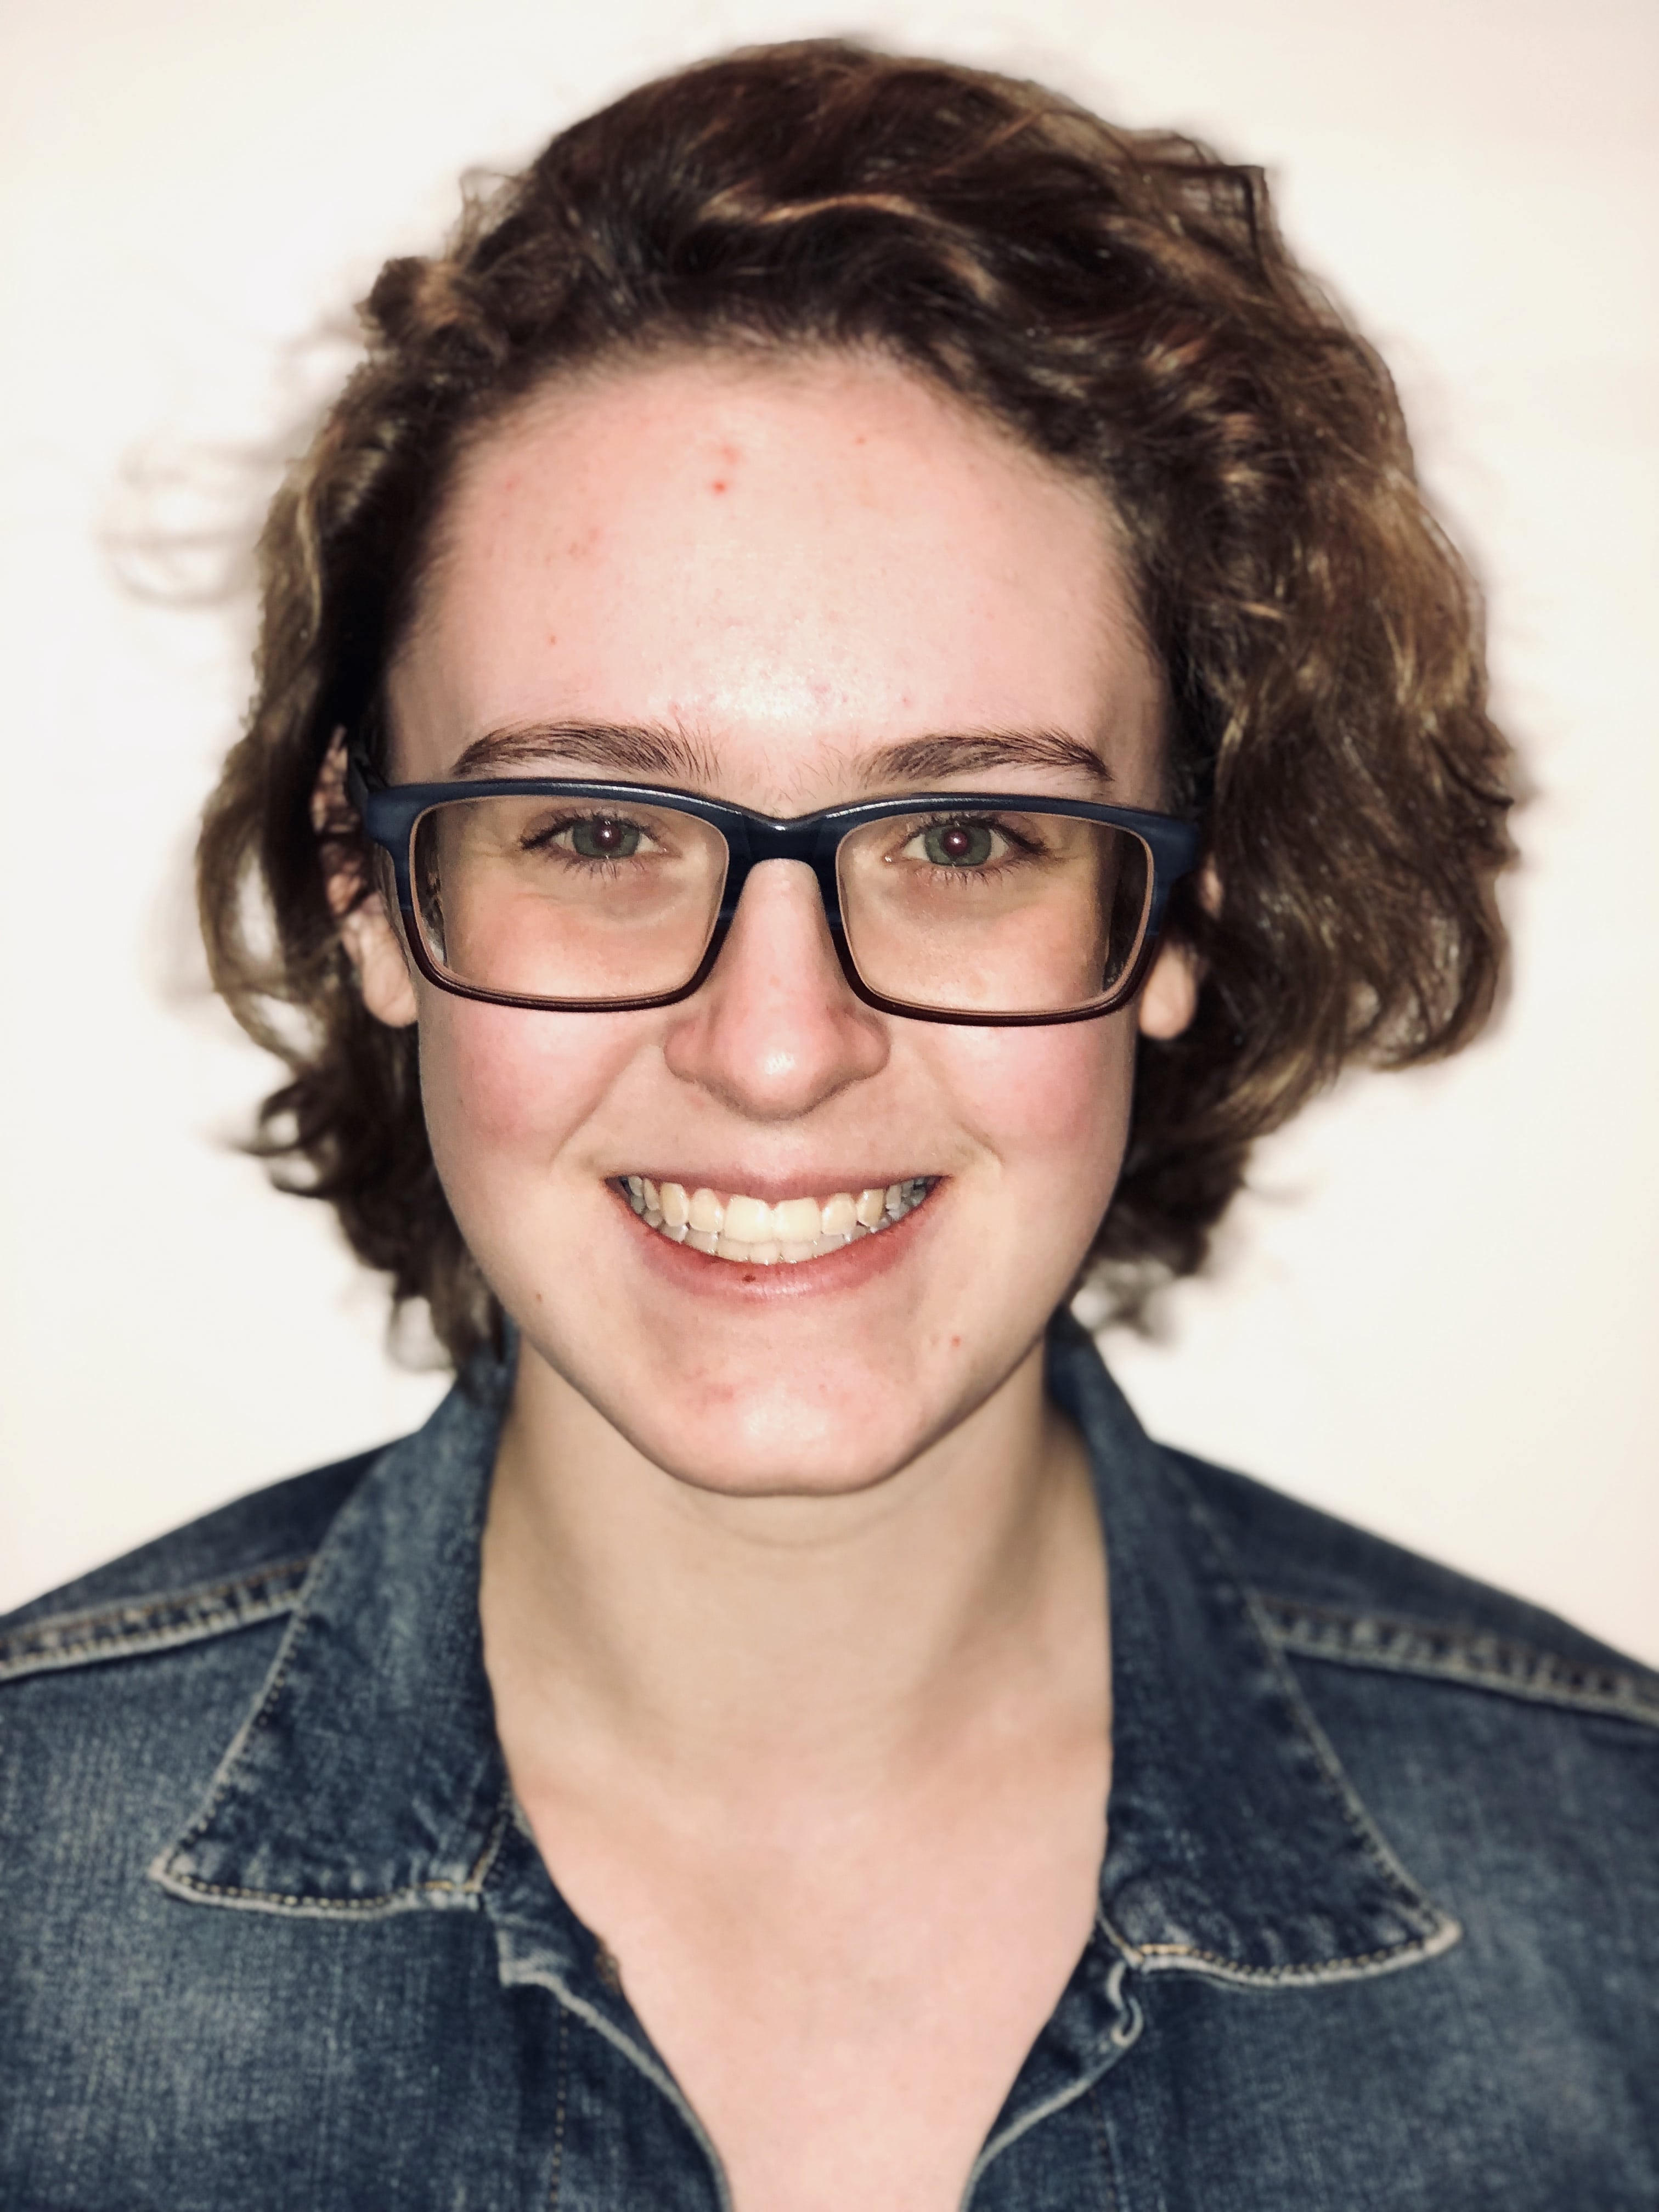 A head and shoulders picture of a smiling young woman in a jean jacket with short, curly brown hair, green eyes and glasses.